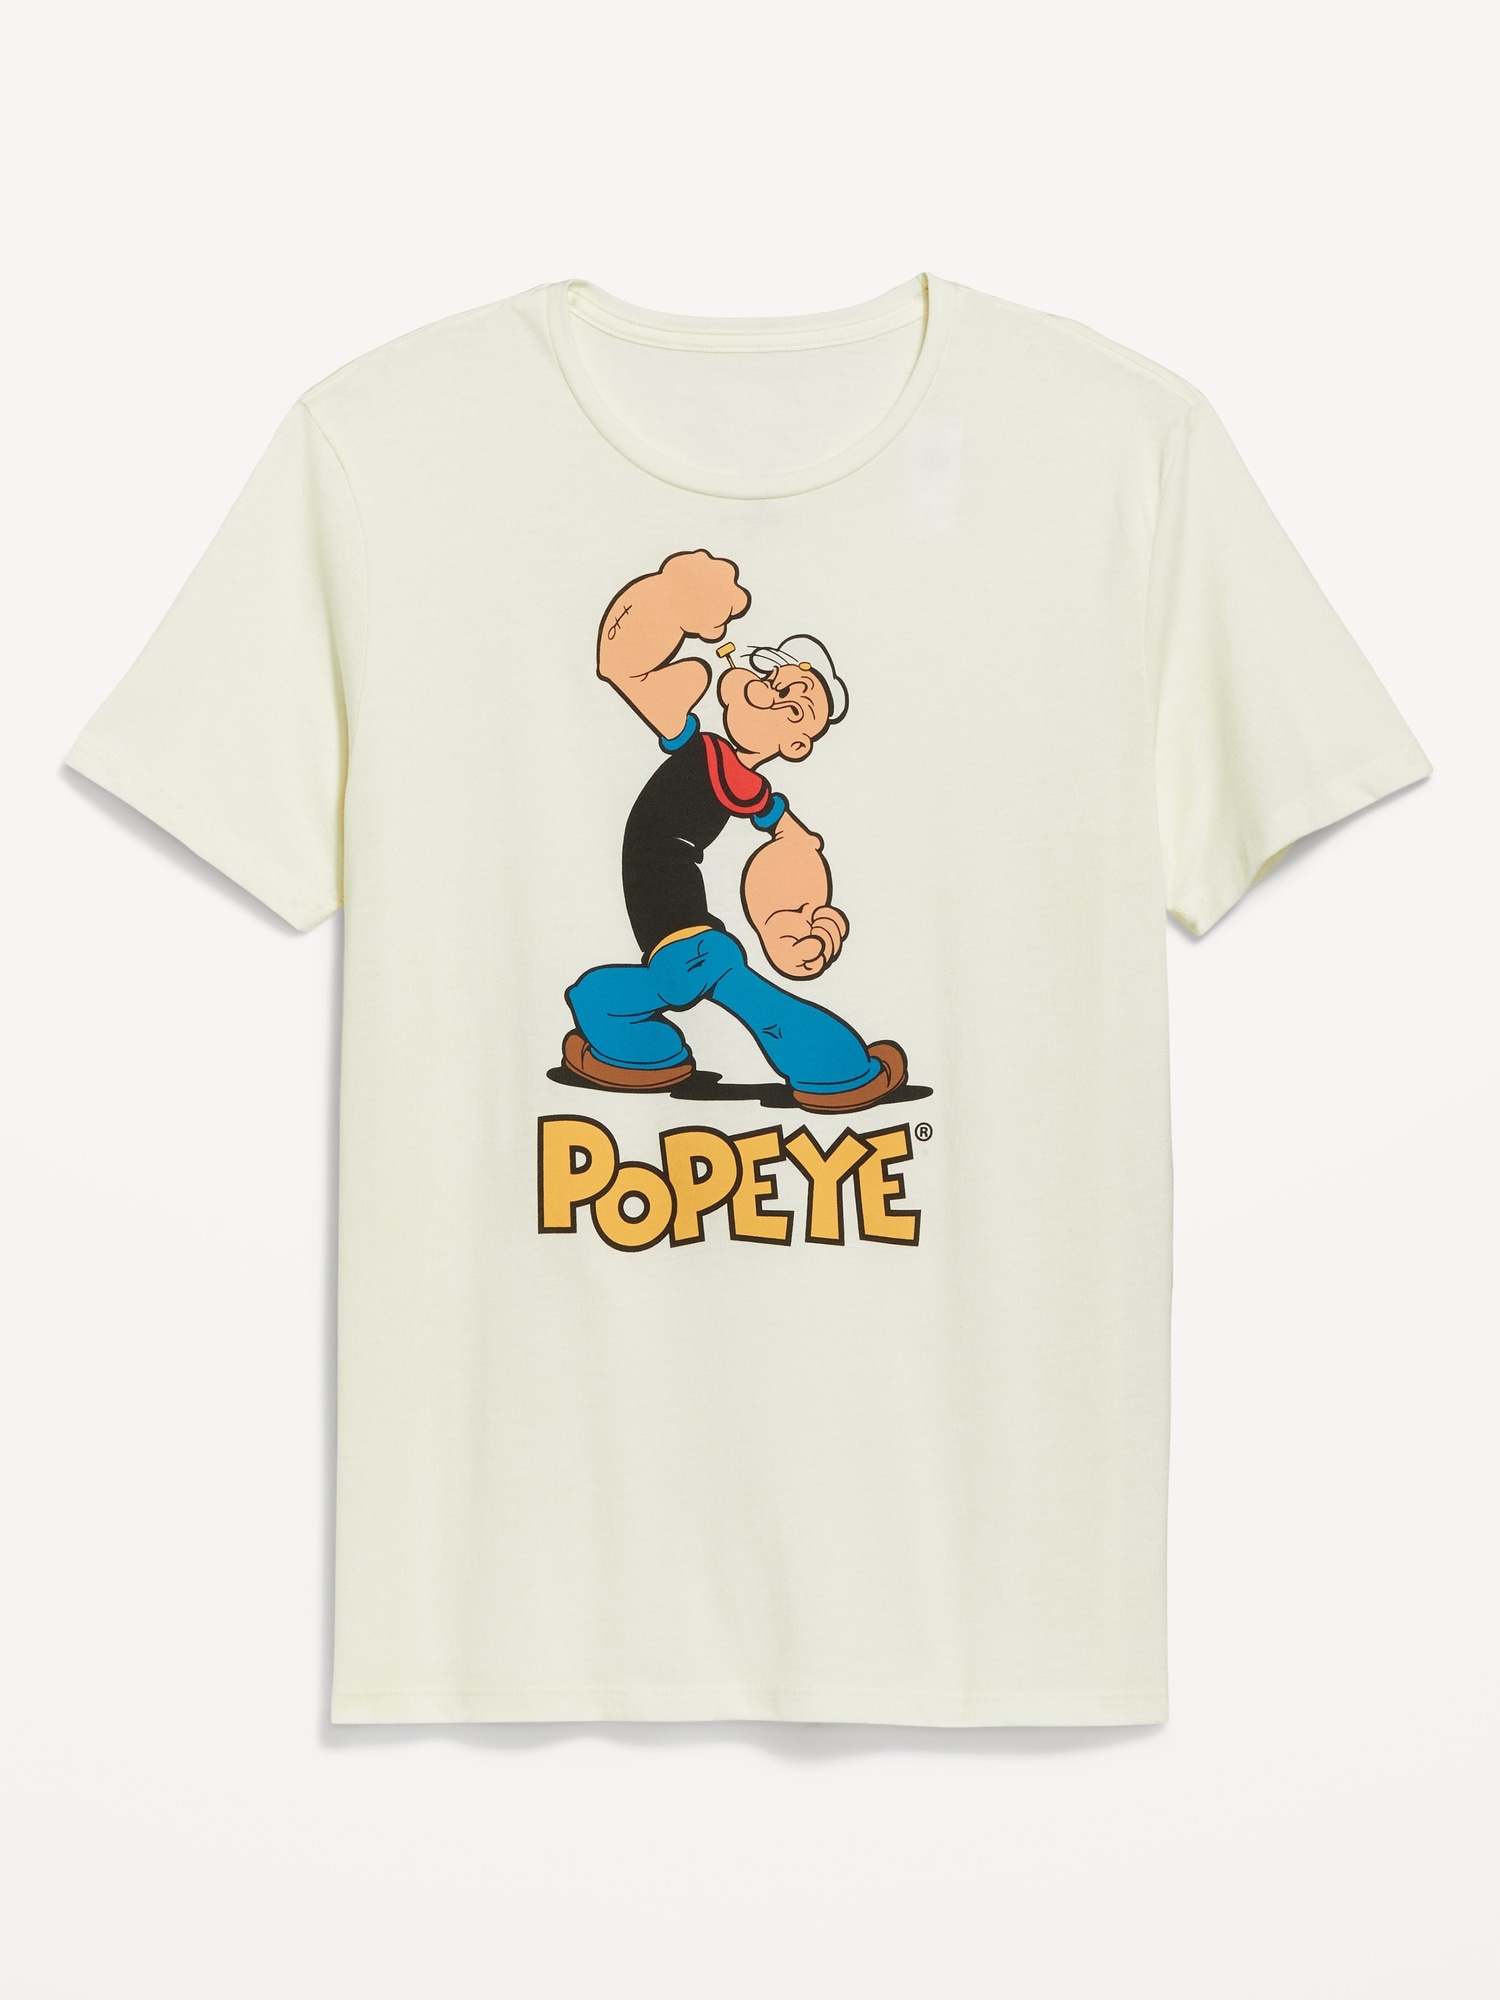 Popeye Gender-Neutral T-Shirt for Adults Hot Deal